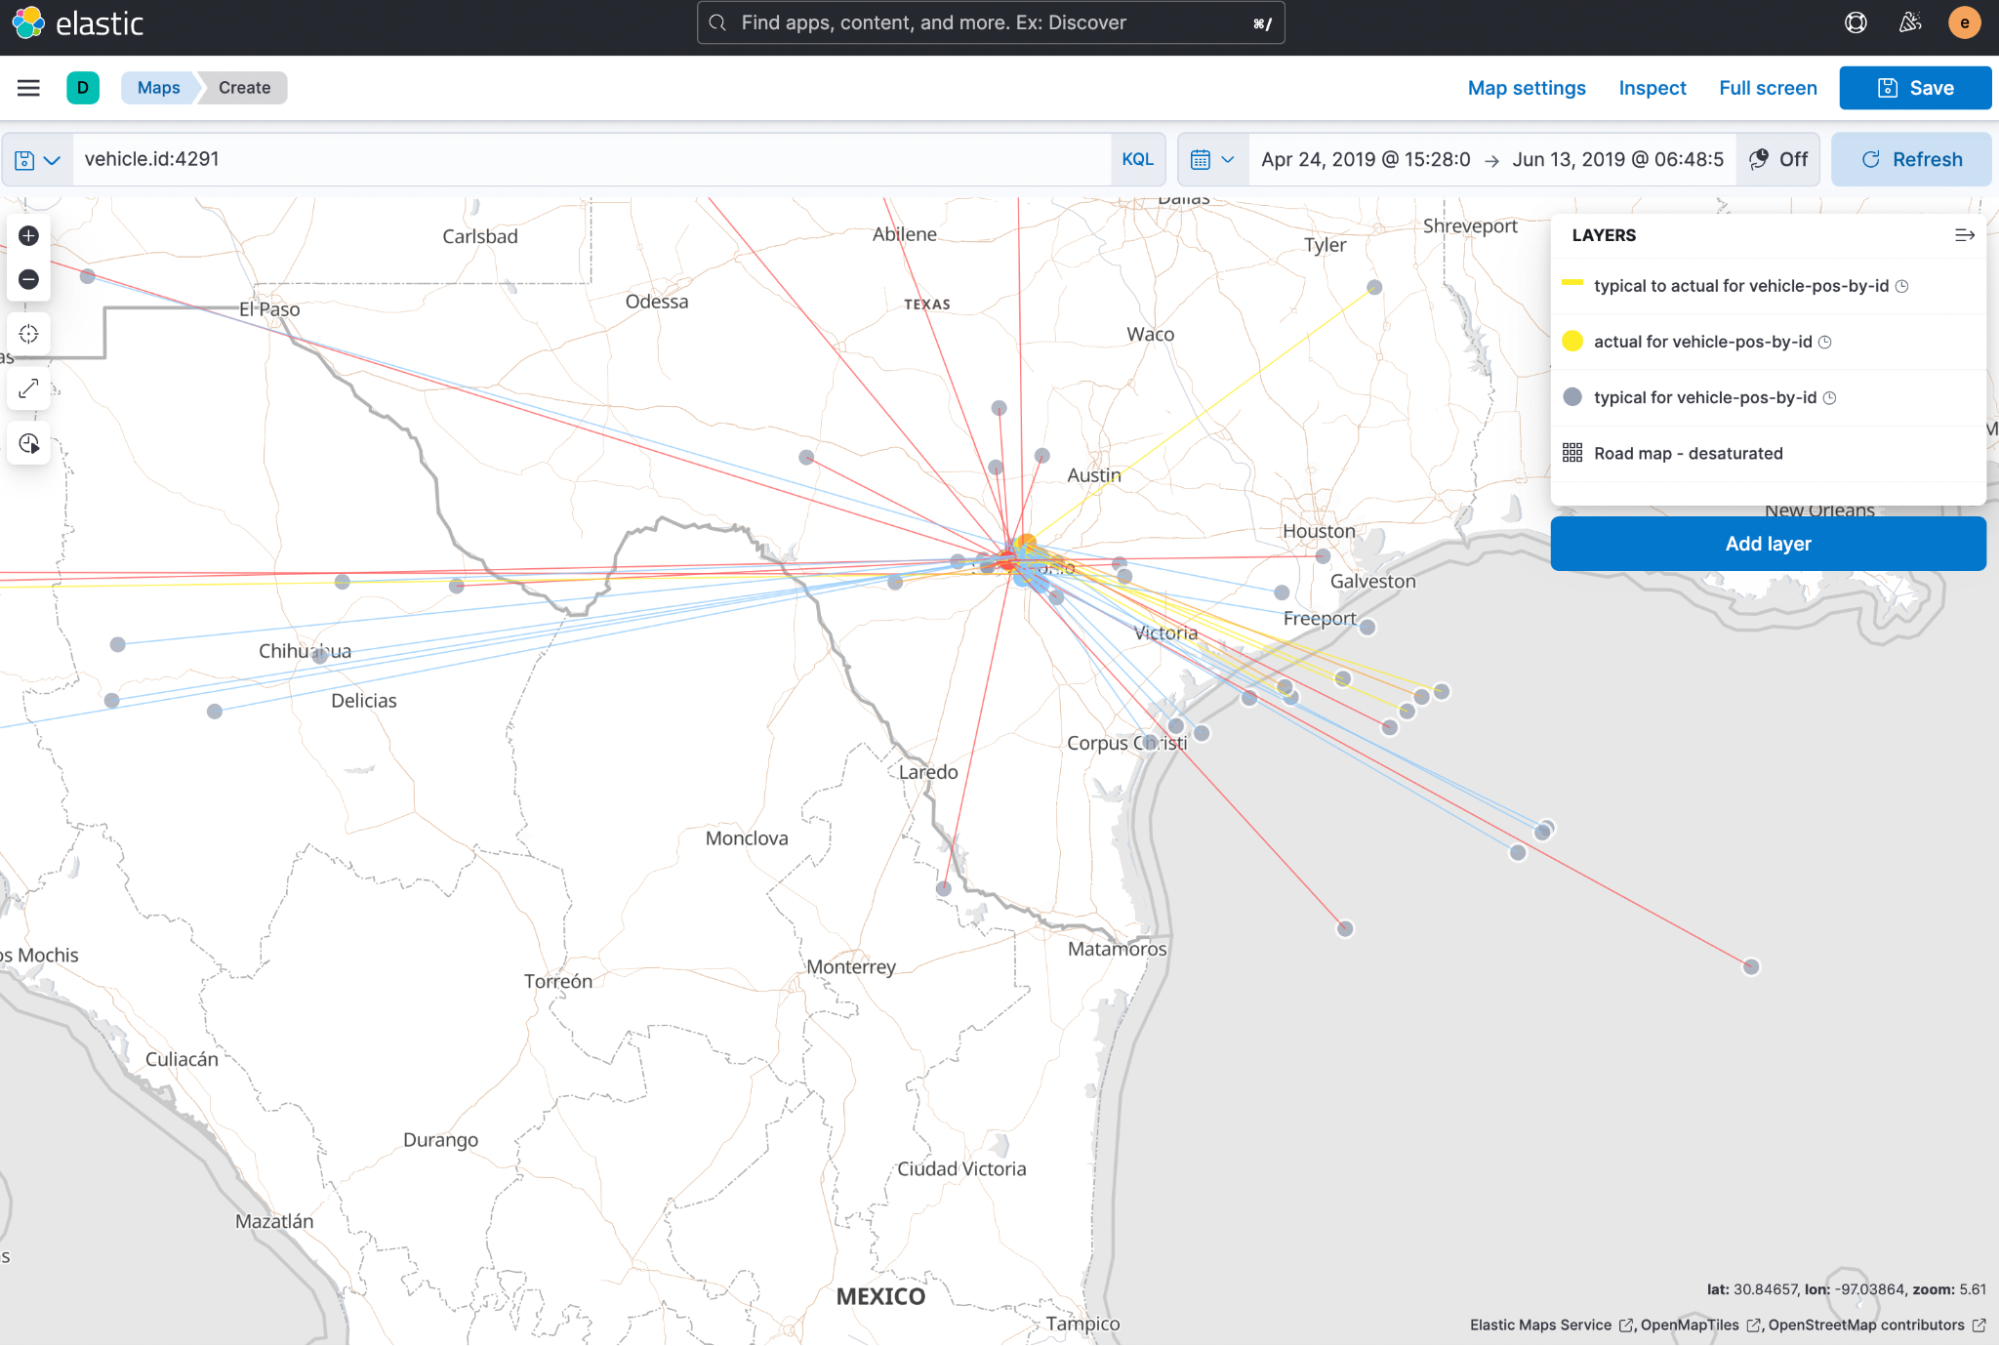 This will take you directly into Elastic Maps with a filter already in place for that particular vehicle id.